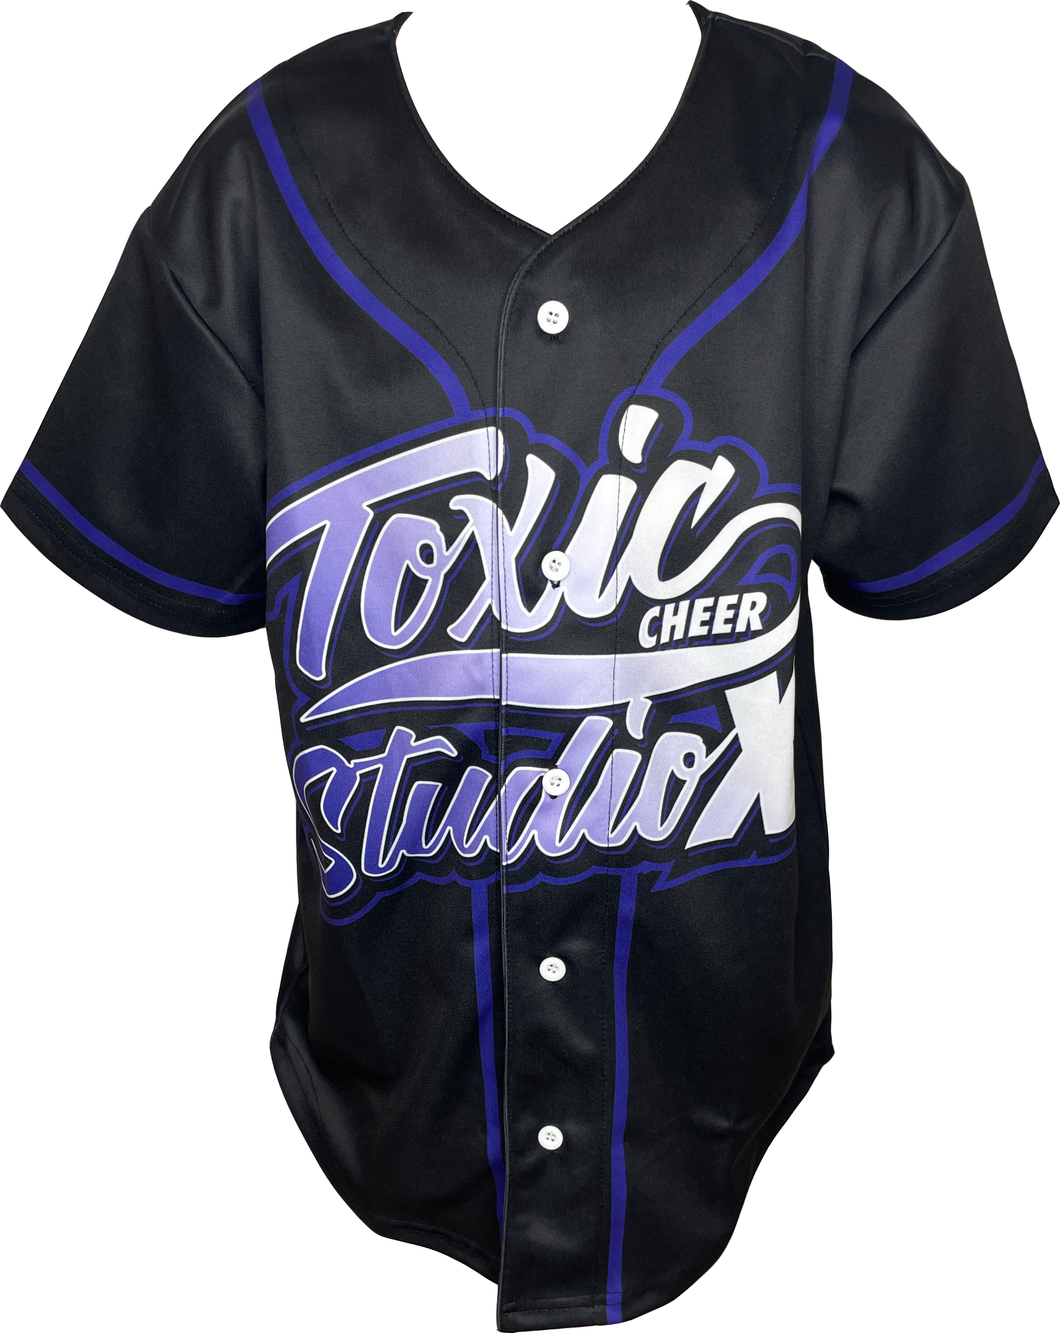 Toxic Cheer/Studio X Jersey - Athlete - Available Now